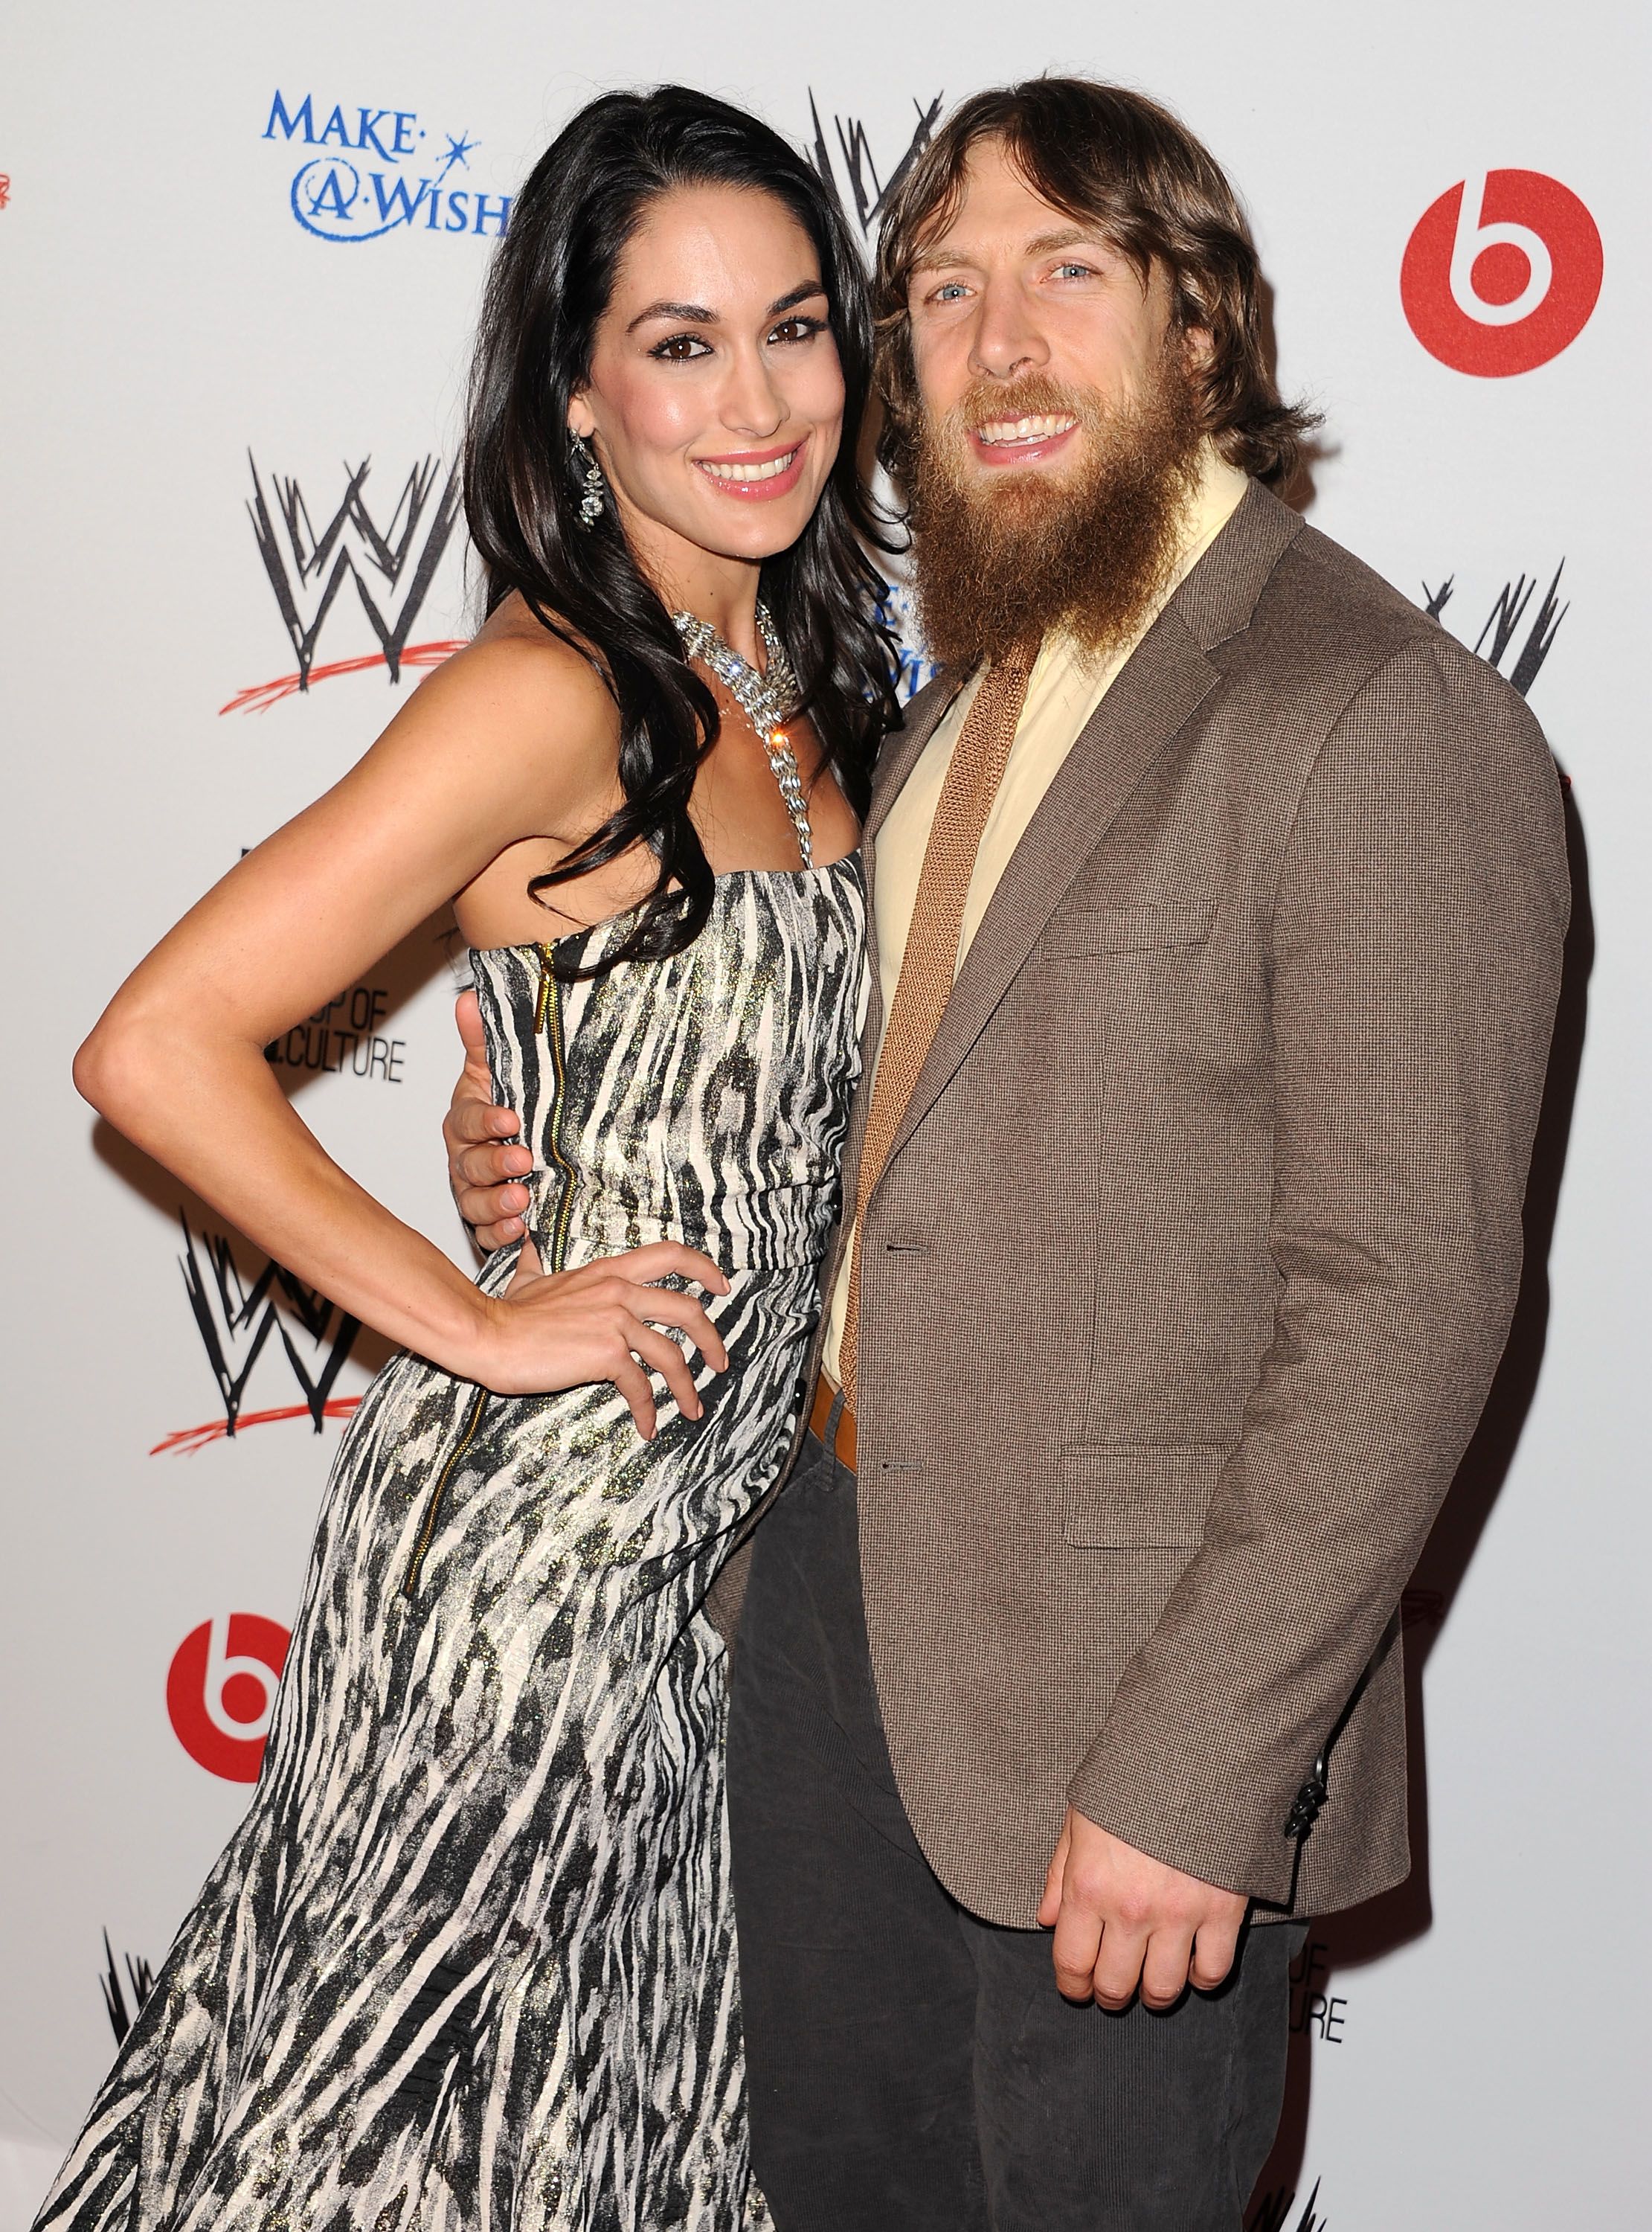 Brie Bella welcomes second child with husband Daniel Bryan